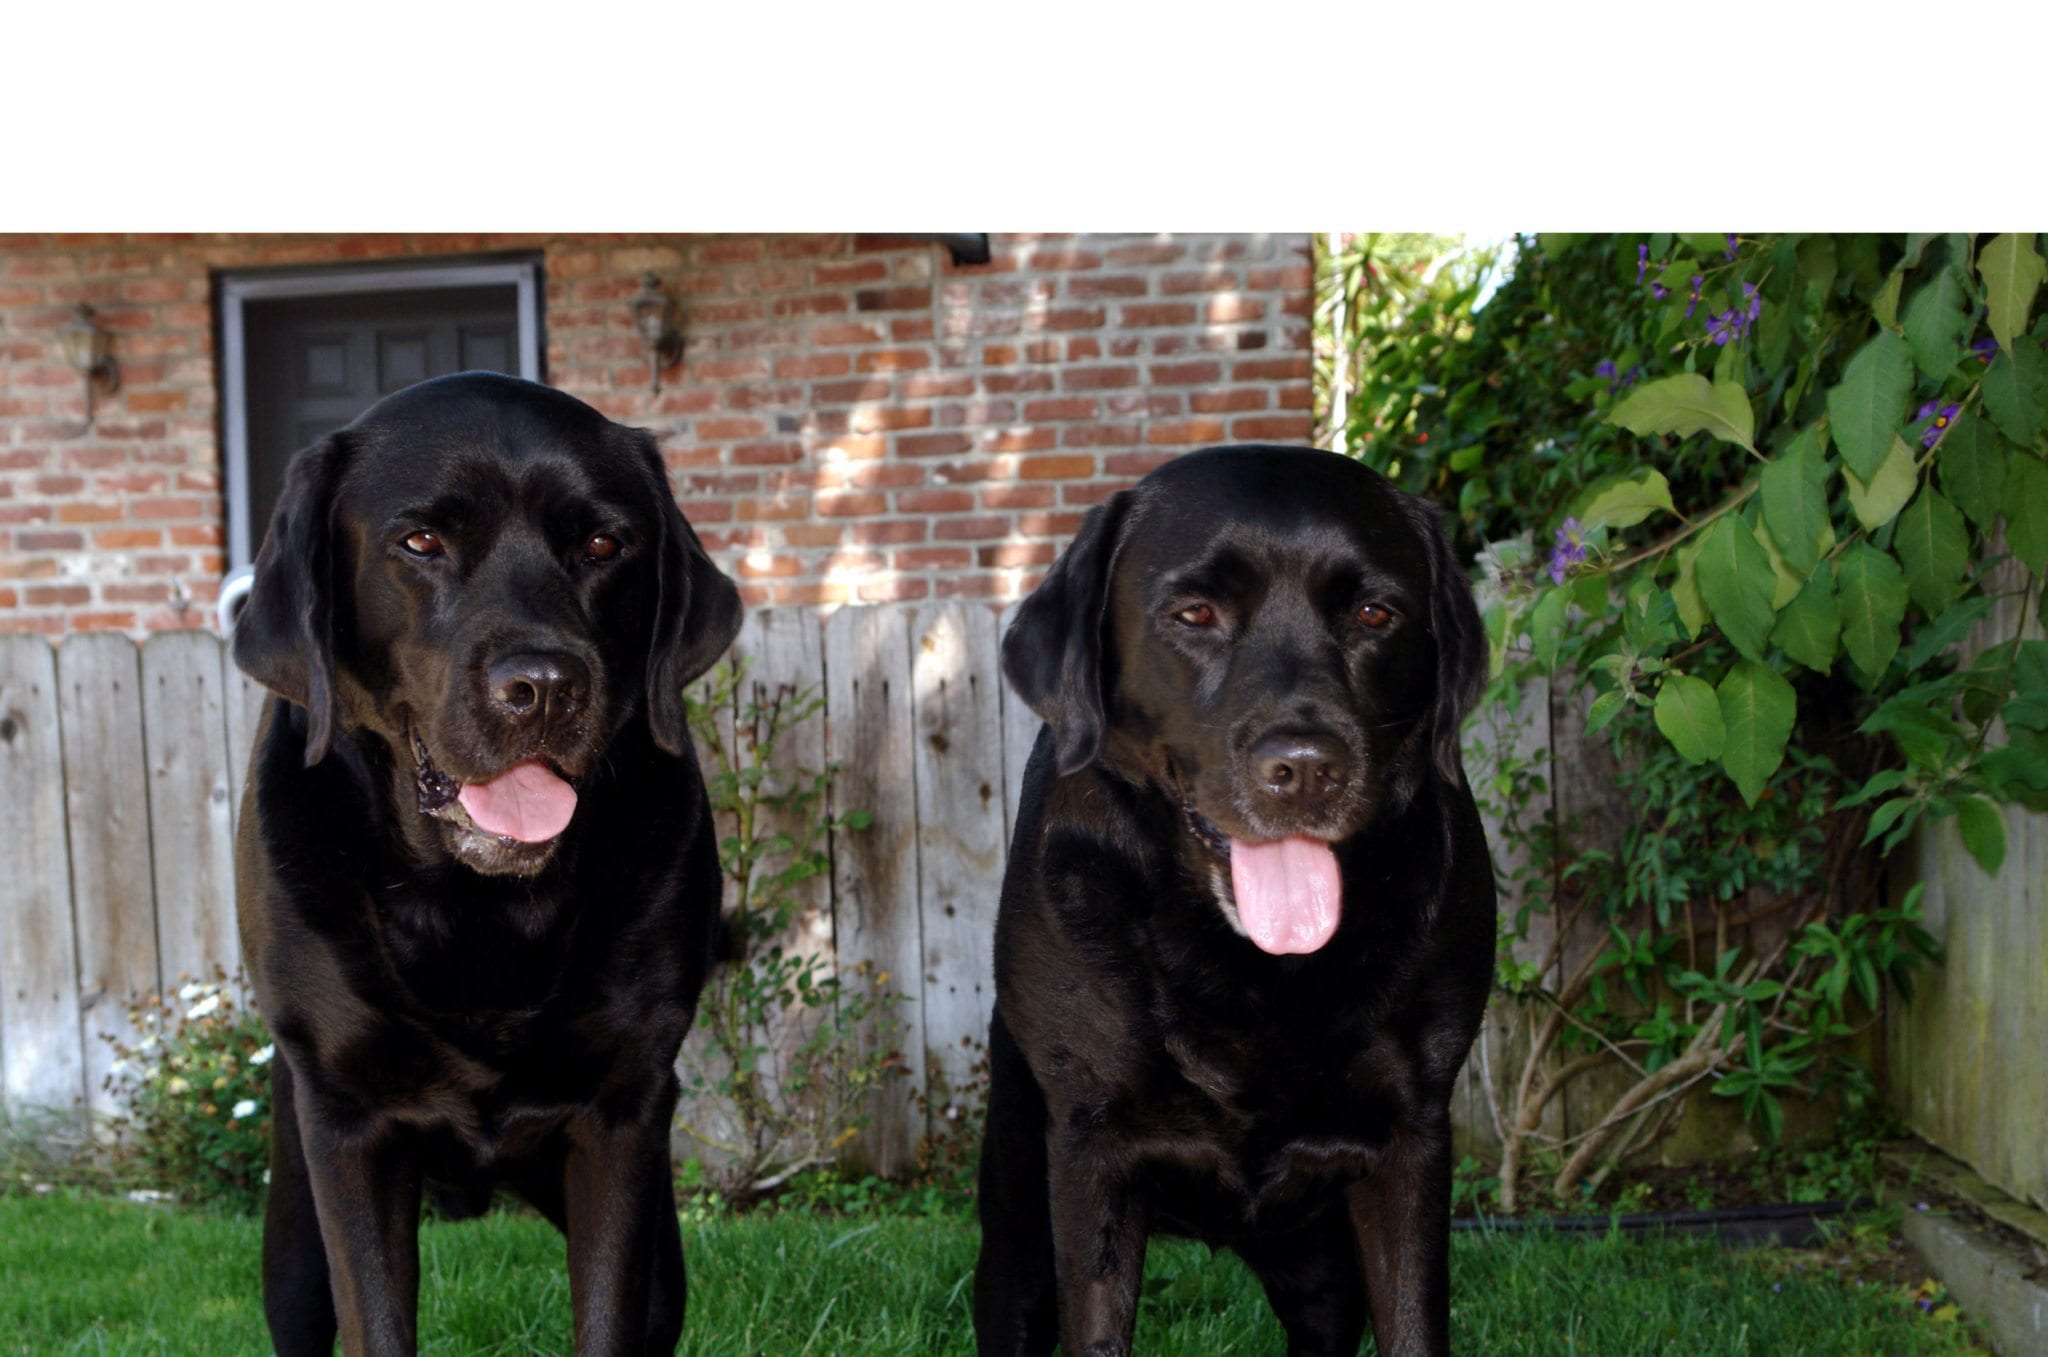 two black dogs standing next to each other with their tongues sticking out